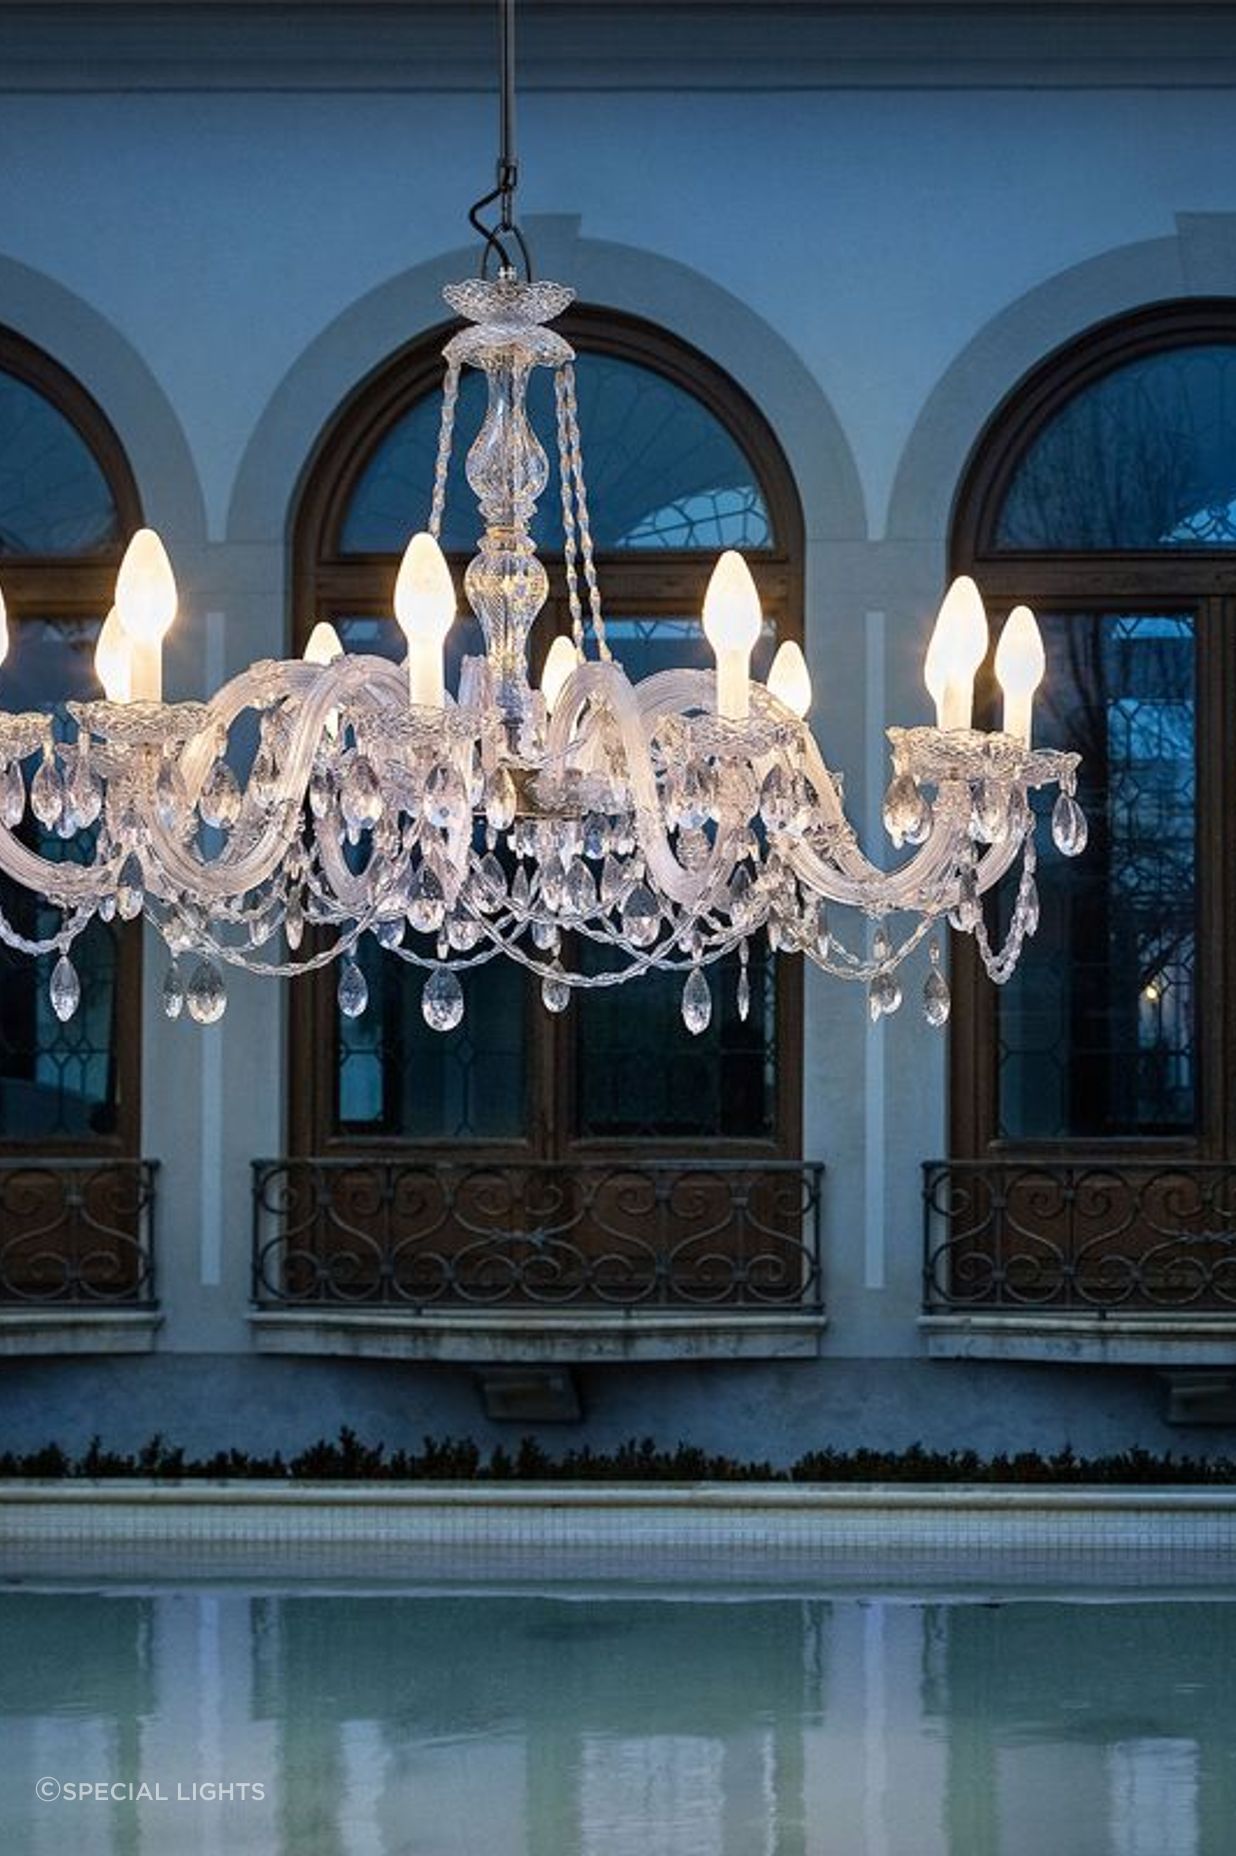 Drylight S12 Outdoor Chandelier from Special Lights